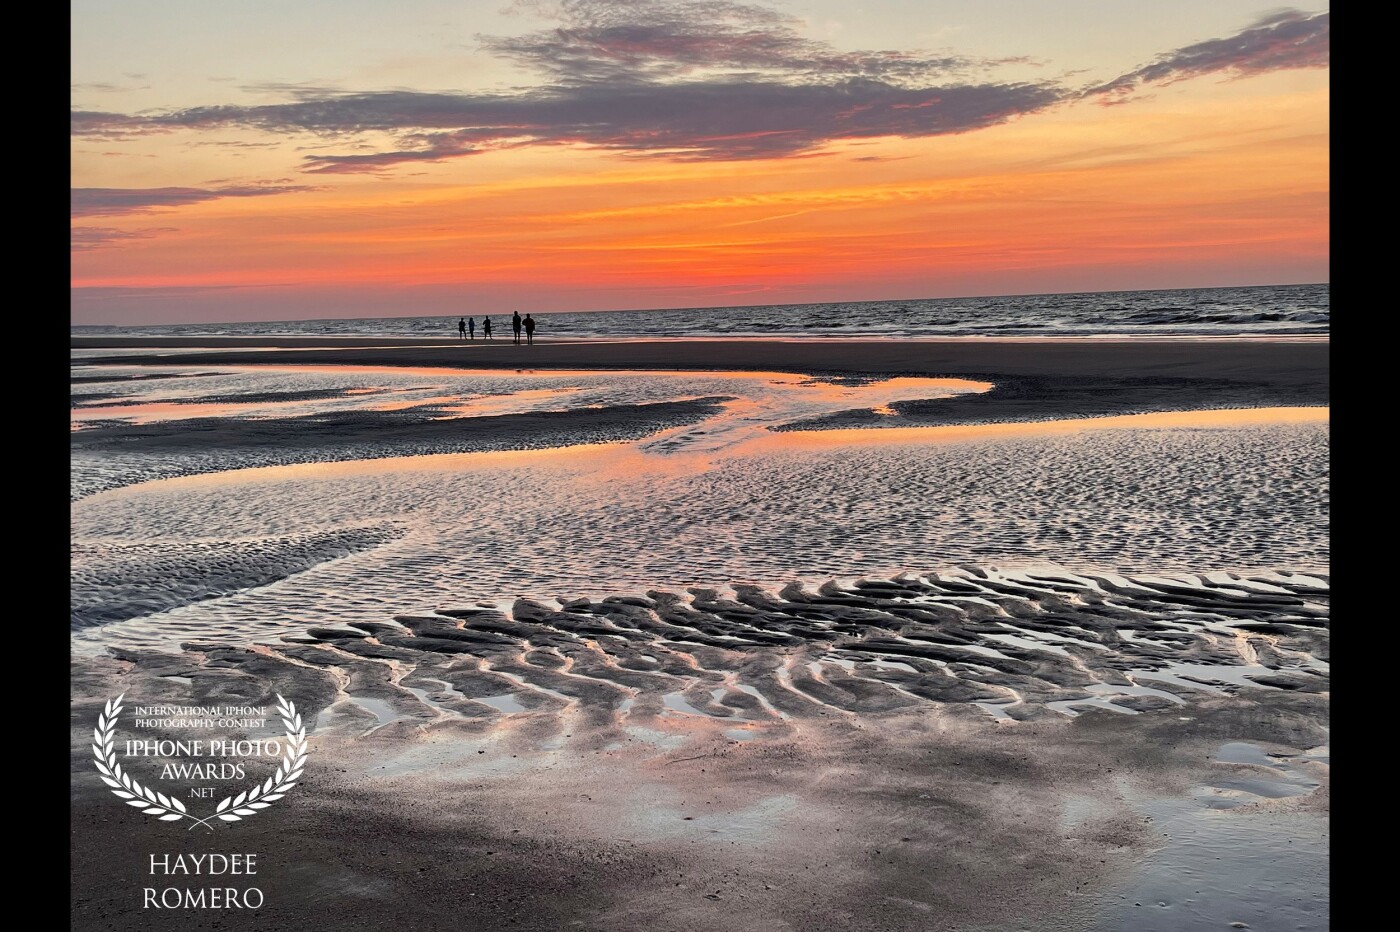 The rising sun at Hilton Head Island in South Carolina creates a ripple of shadows and light on the beach where the constant ebb and flow of the tide has sculpted the sand.